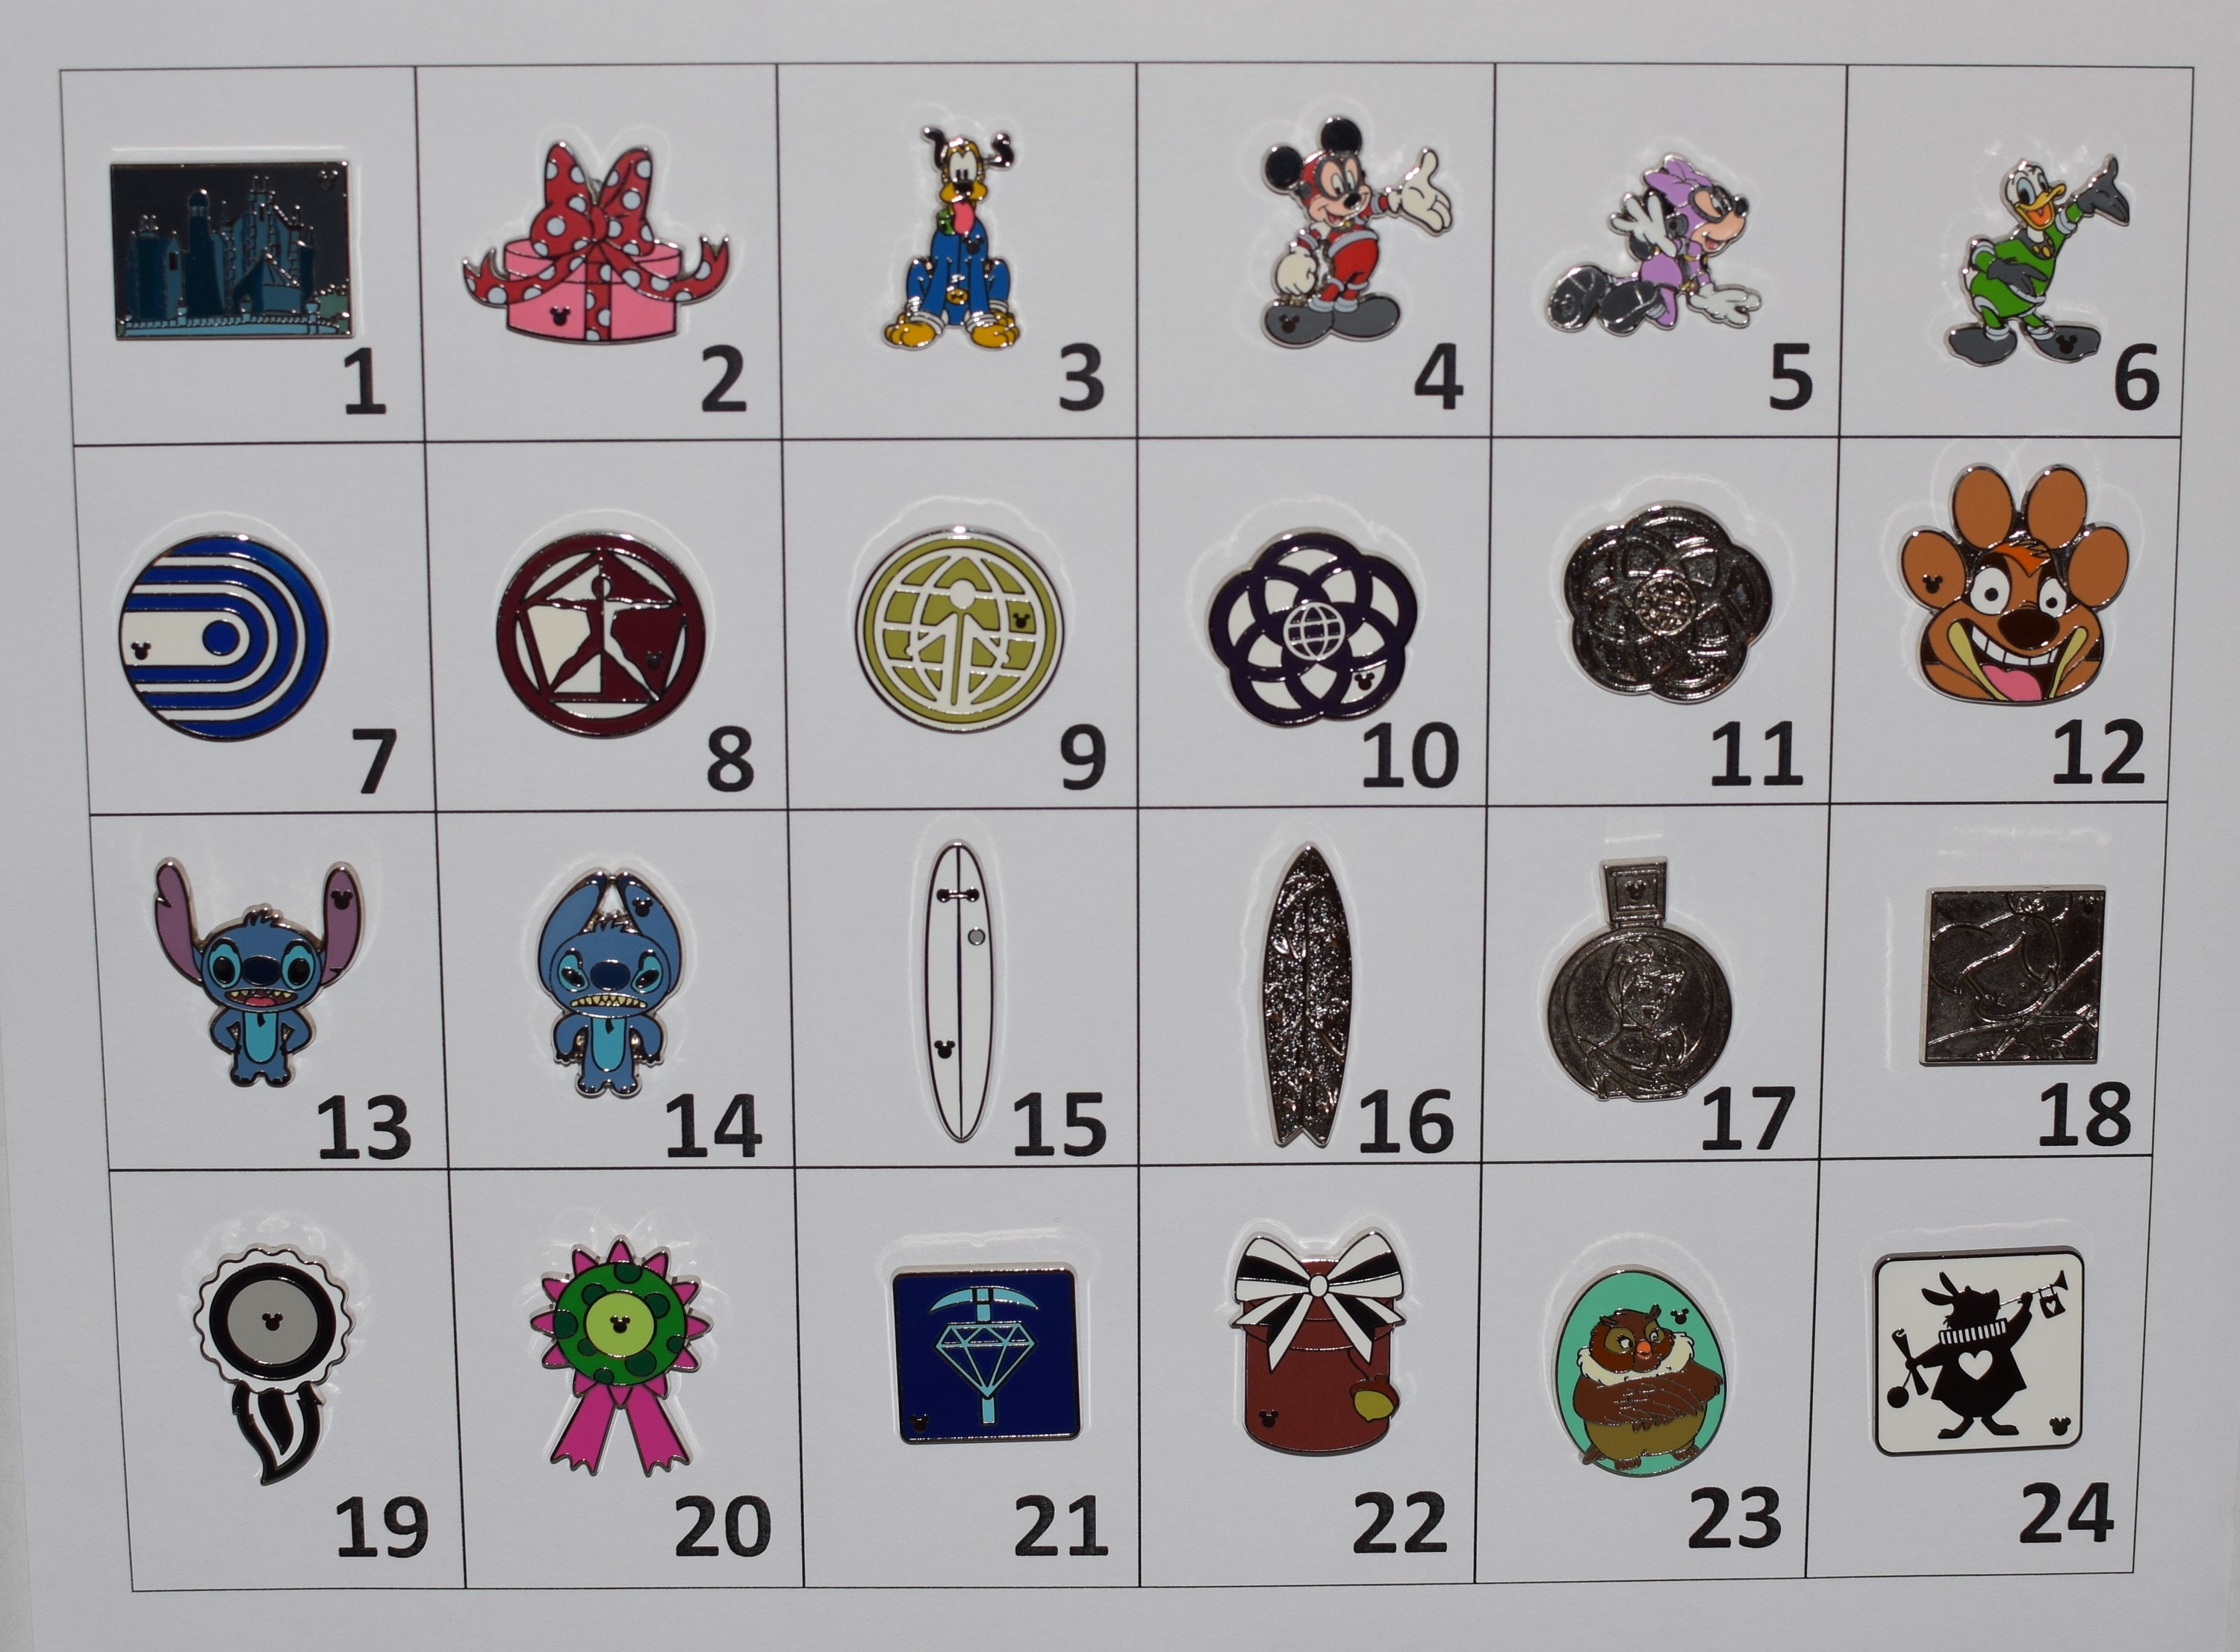 Lilo and Stitch Pins for sale. $5 shipping within 12 hours. : r/DisneyPins